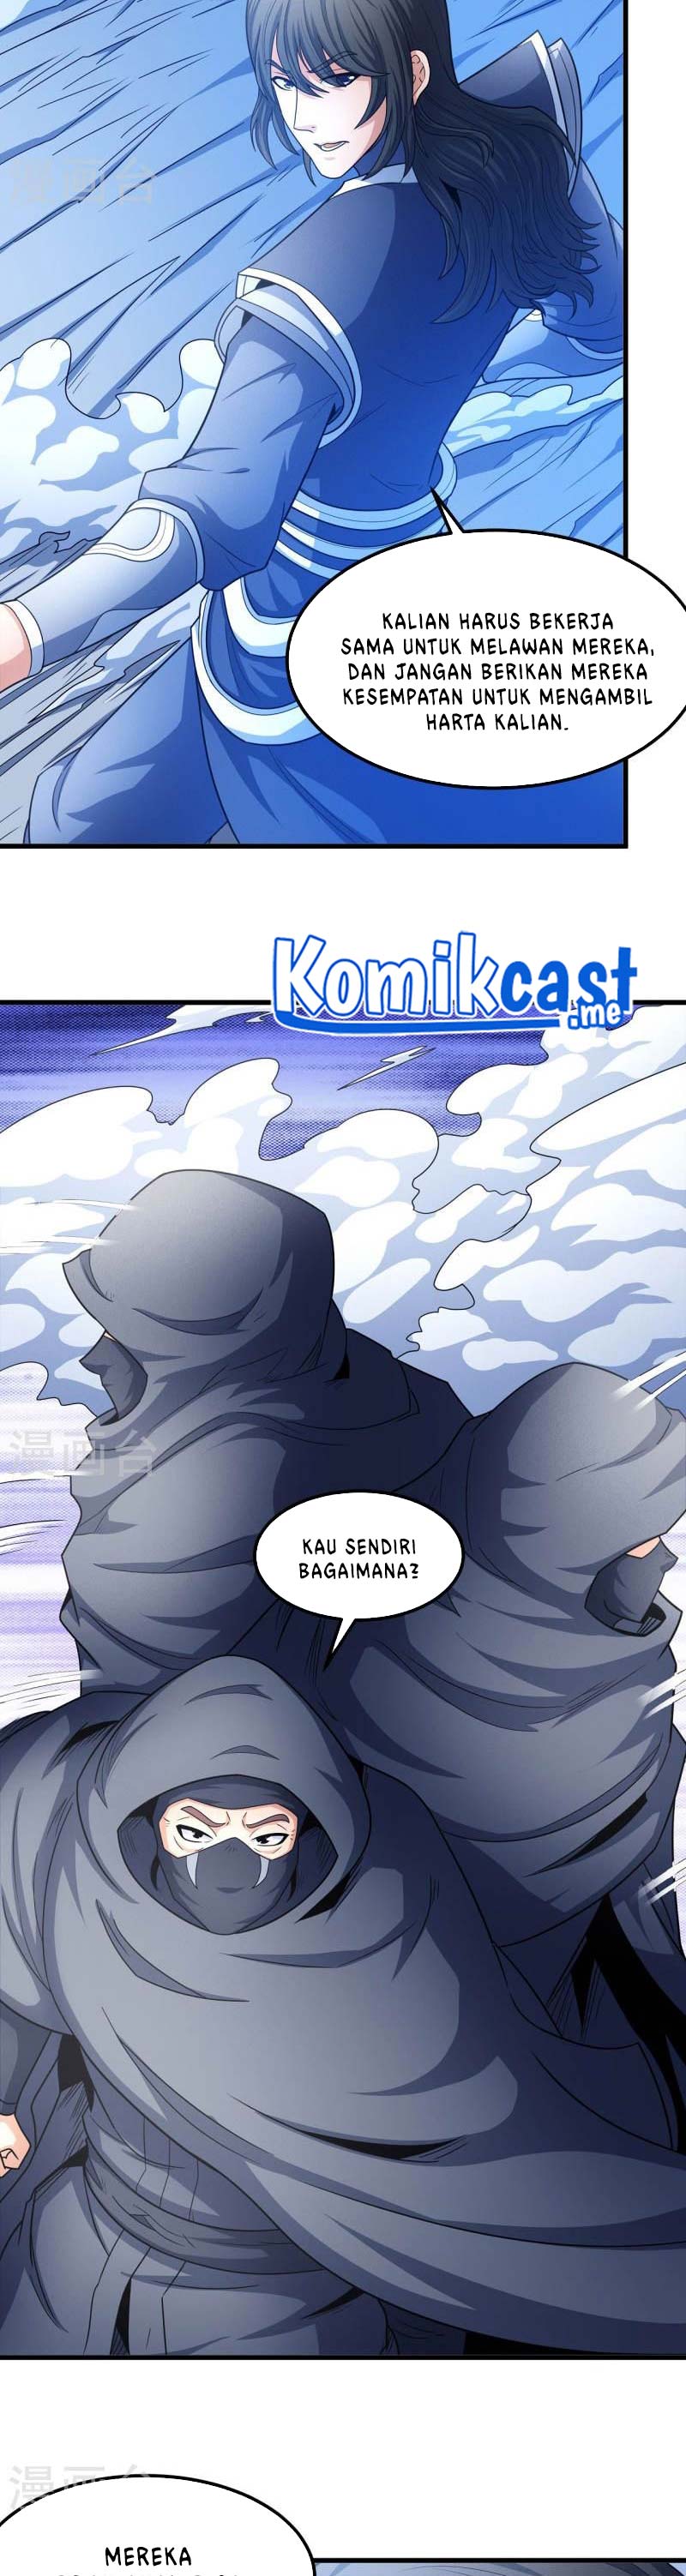 God of Martial Arts Chapter 476